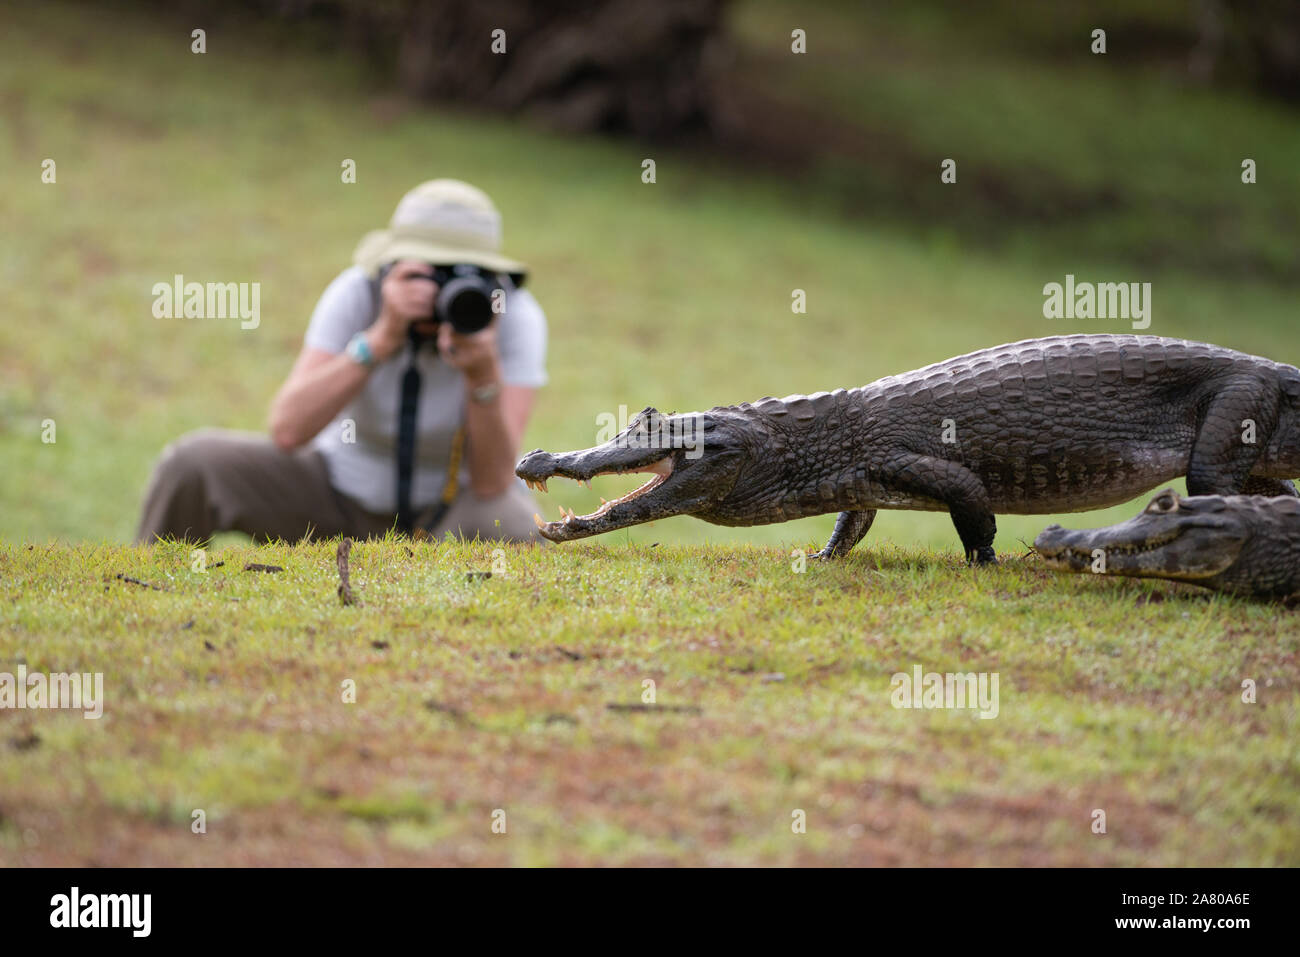 A tourist photographs a Caiman in the Pantanal of Brazil Stock Photo